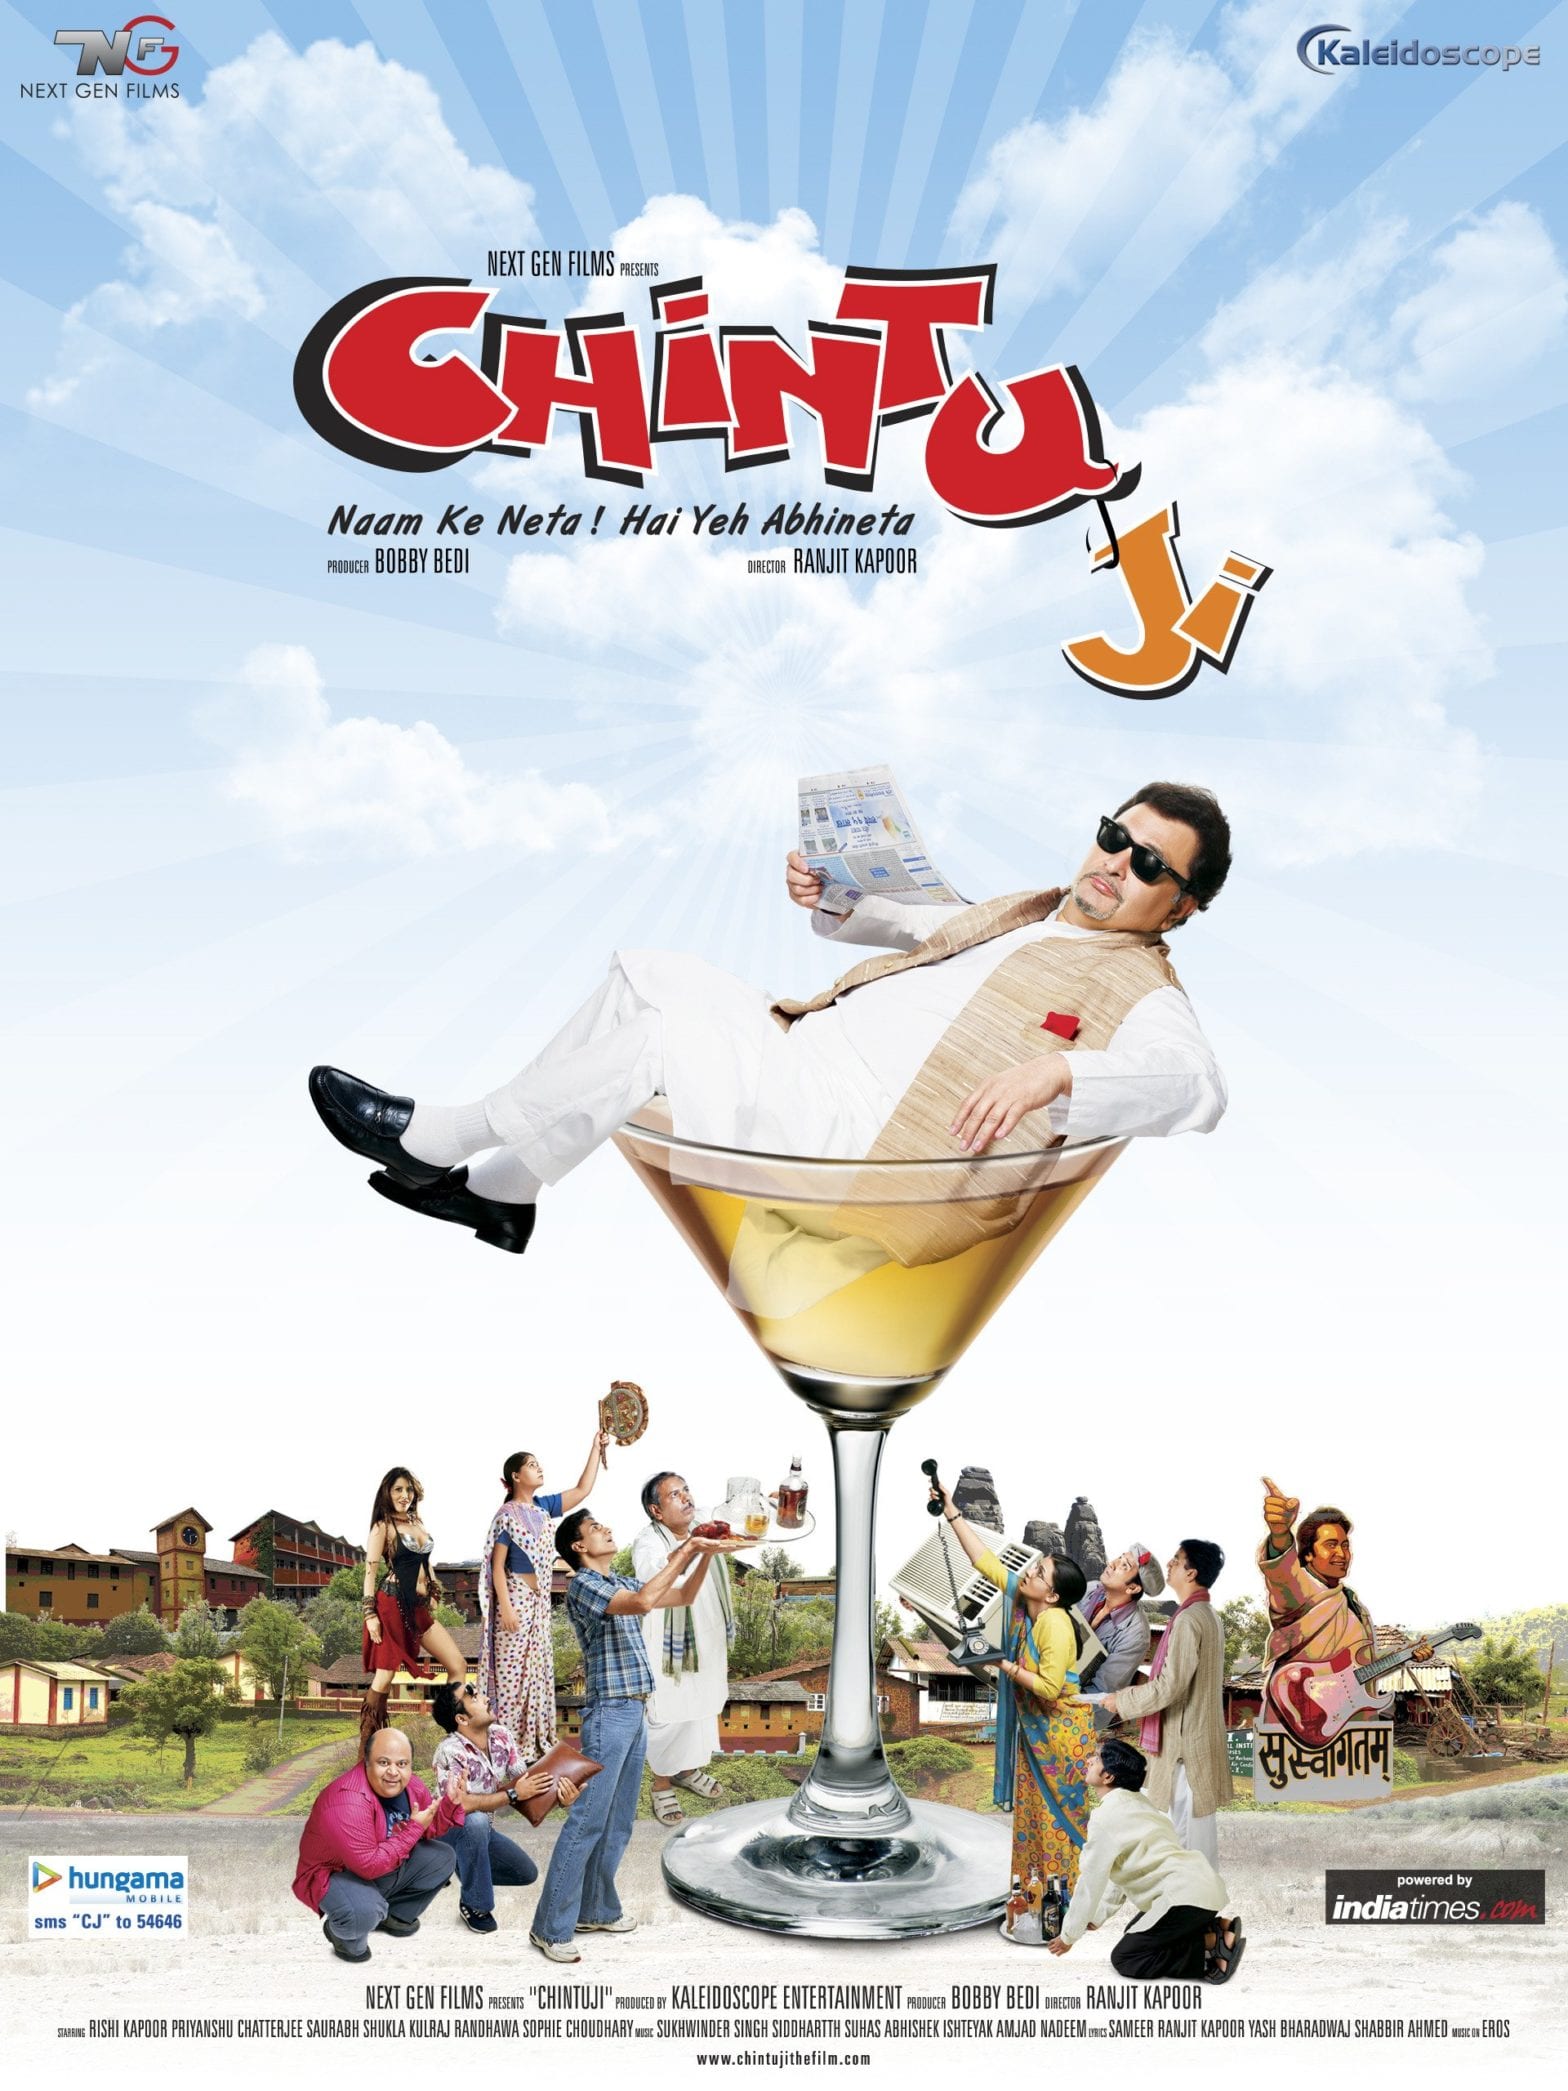 Poster for the movie "Chintu Ji"